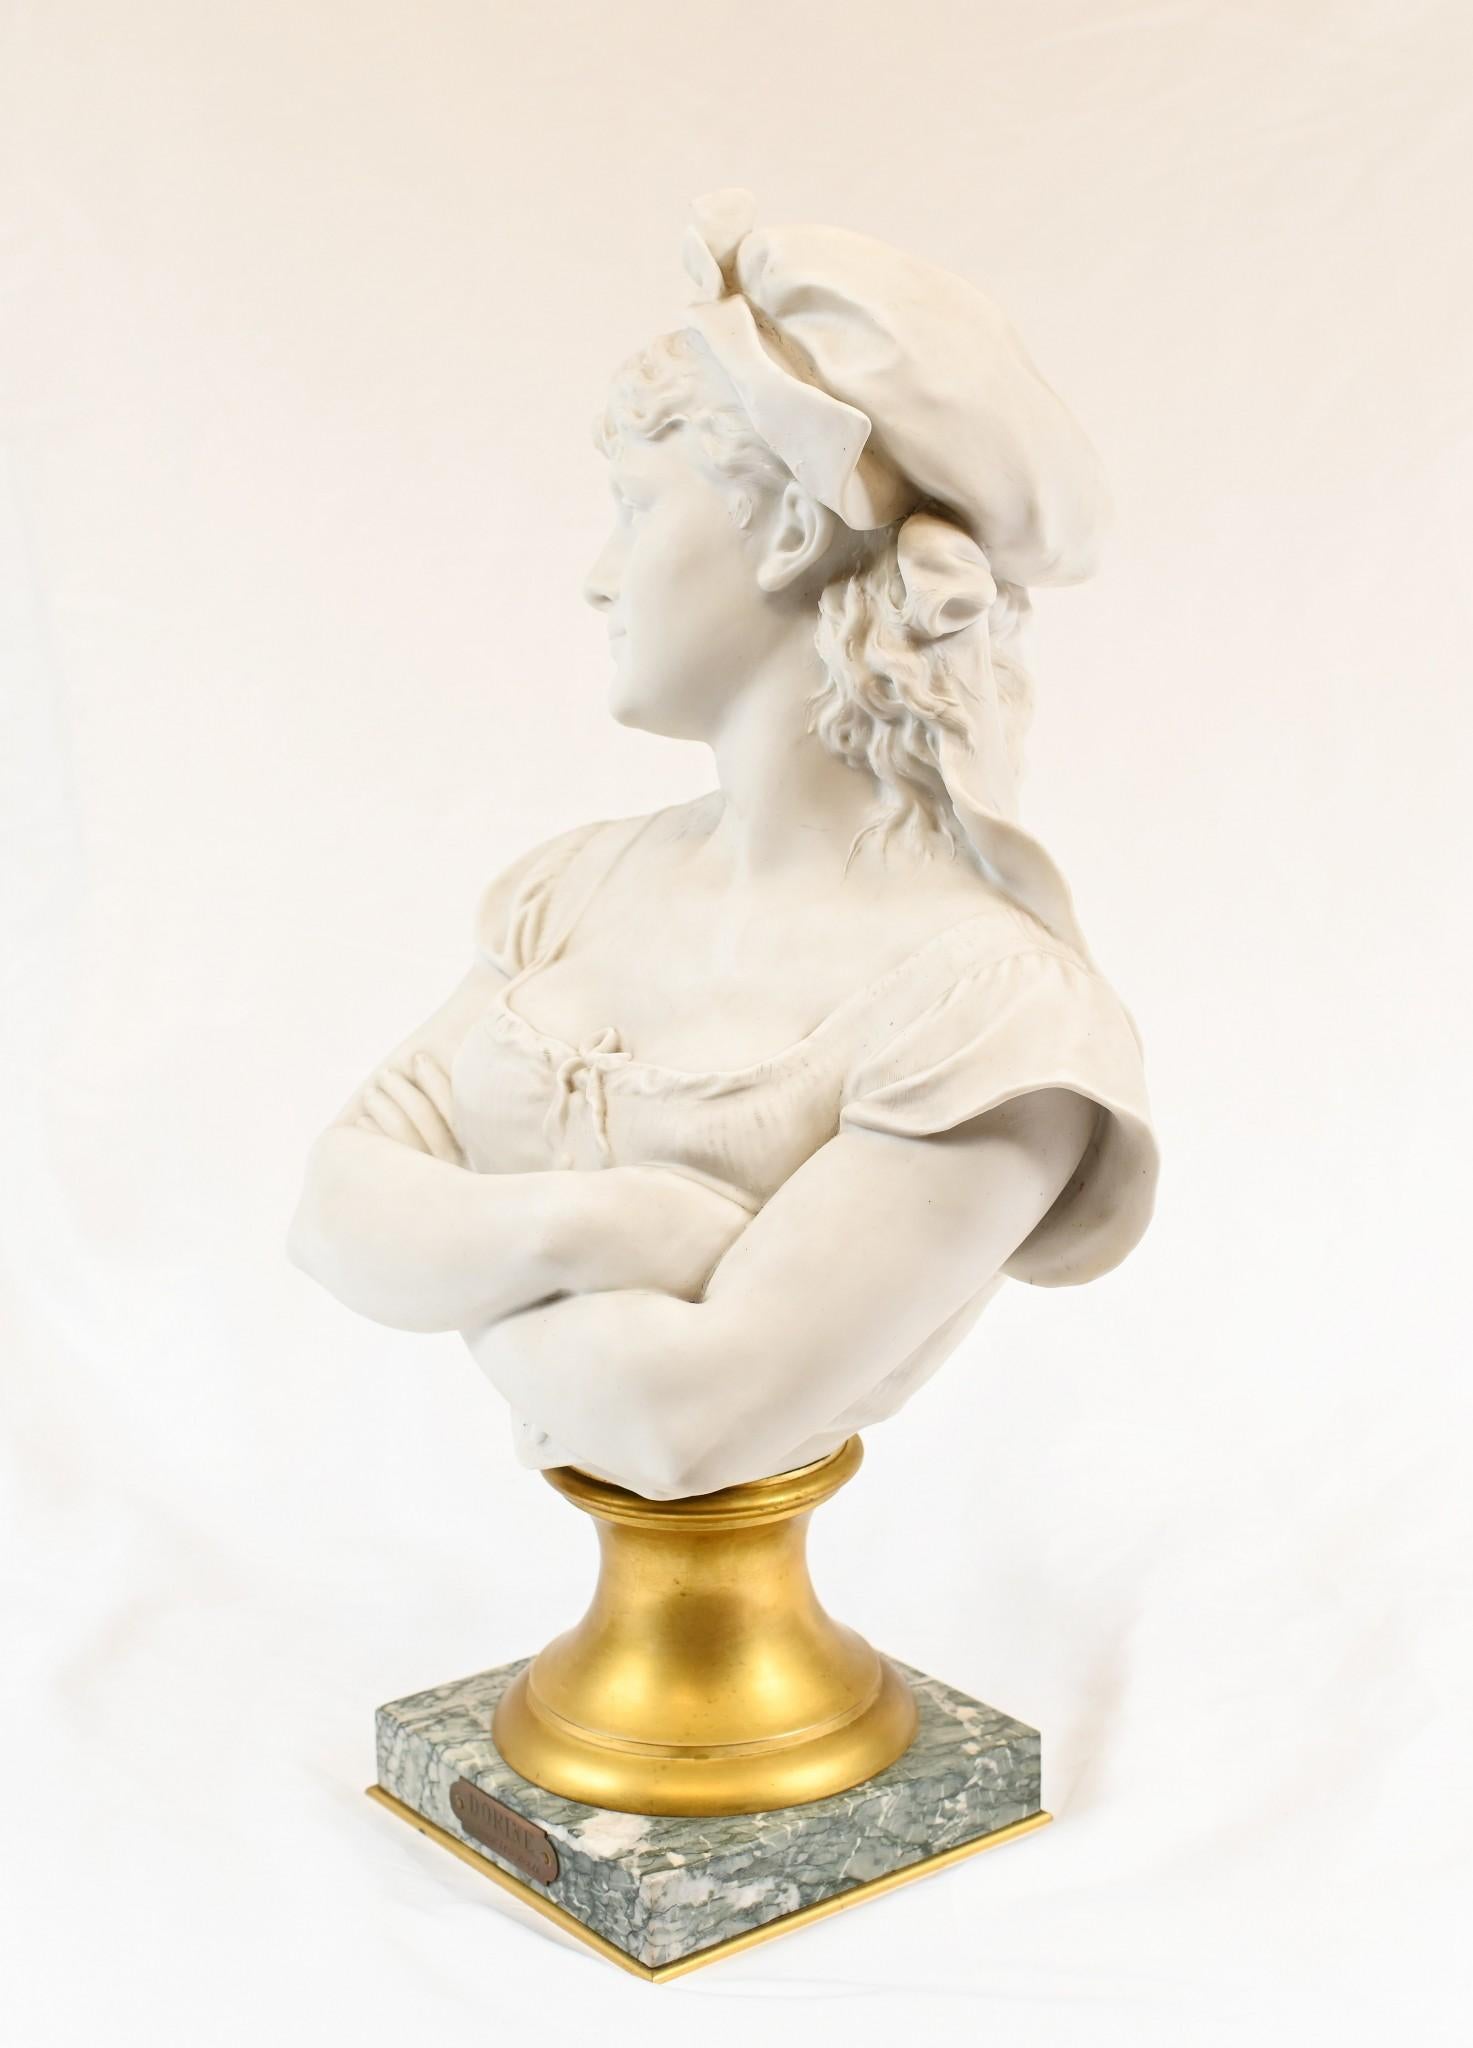 Wonderful Belgium antique biscuit porcelain bust of a young girl
On the base the enscription reads: Dorine Sculp Leop Harze
Léopold Harzé (1831–1893) was a Belgian sculptor who worked in Brussels. He is well known for his terracotta pieces, but also